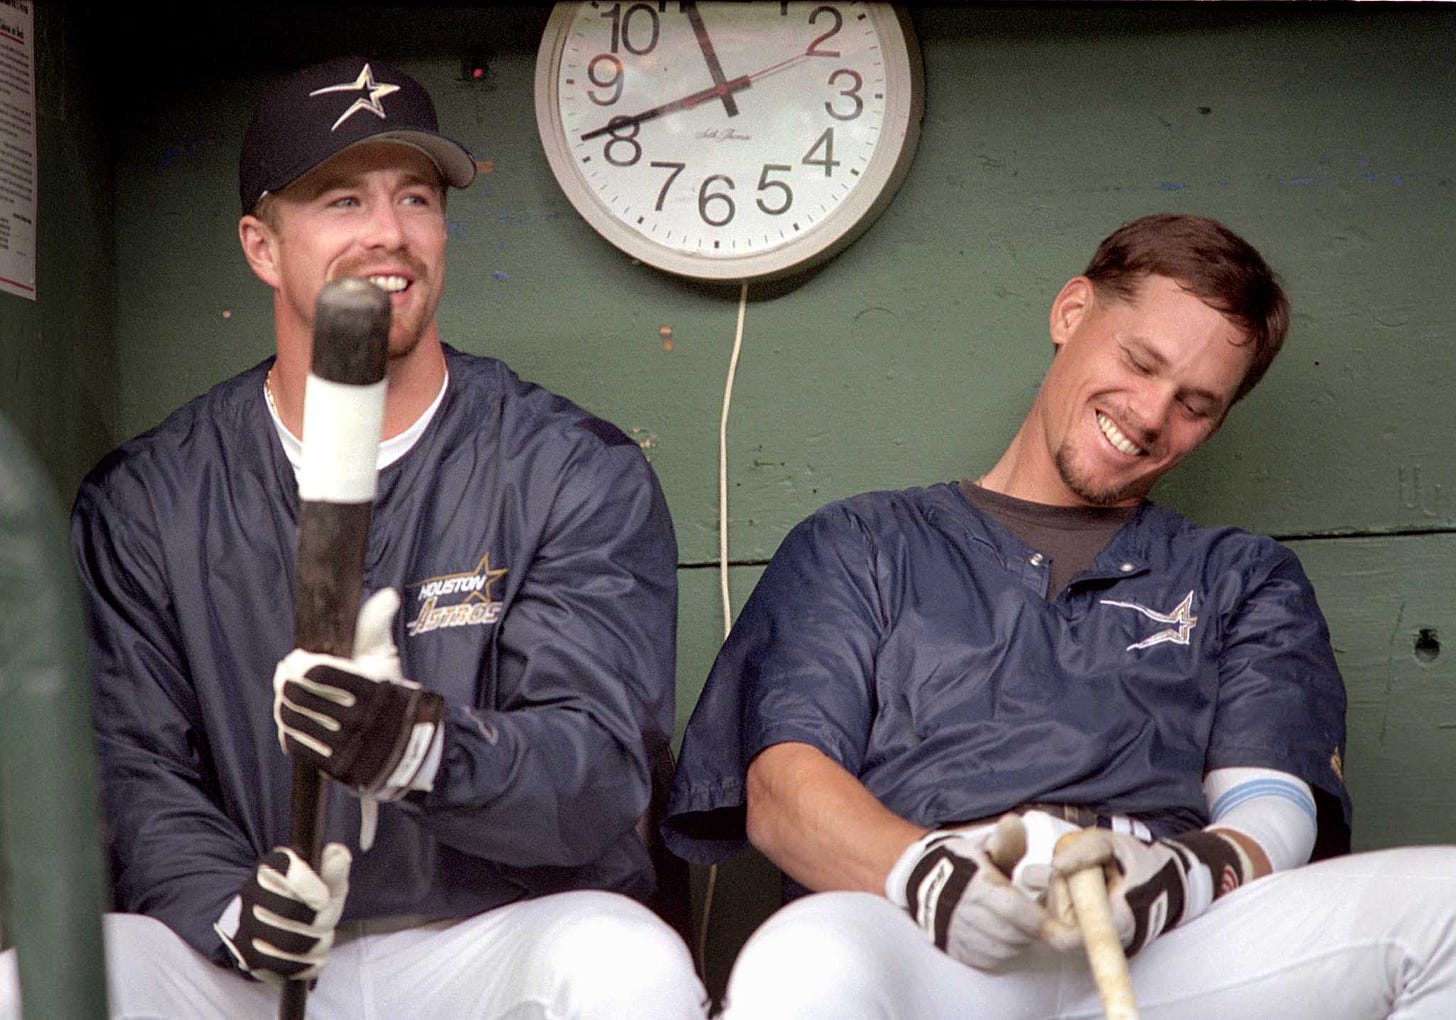 Jeff Bagwell finishes at Astros camp, Craig Biggio begins